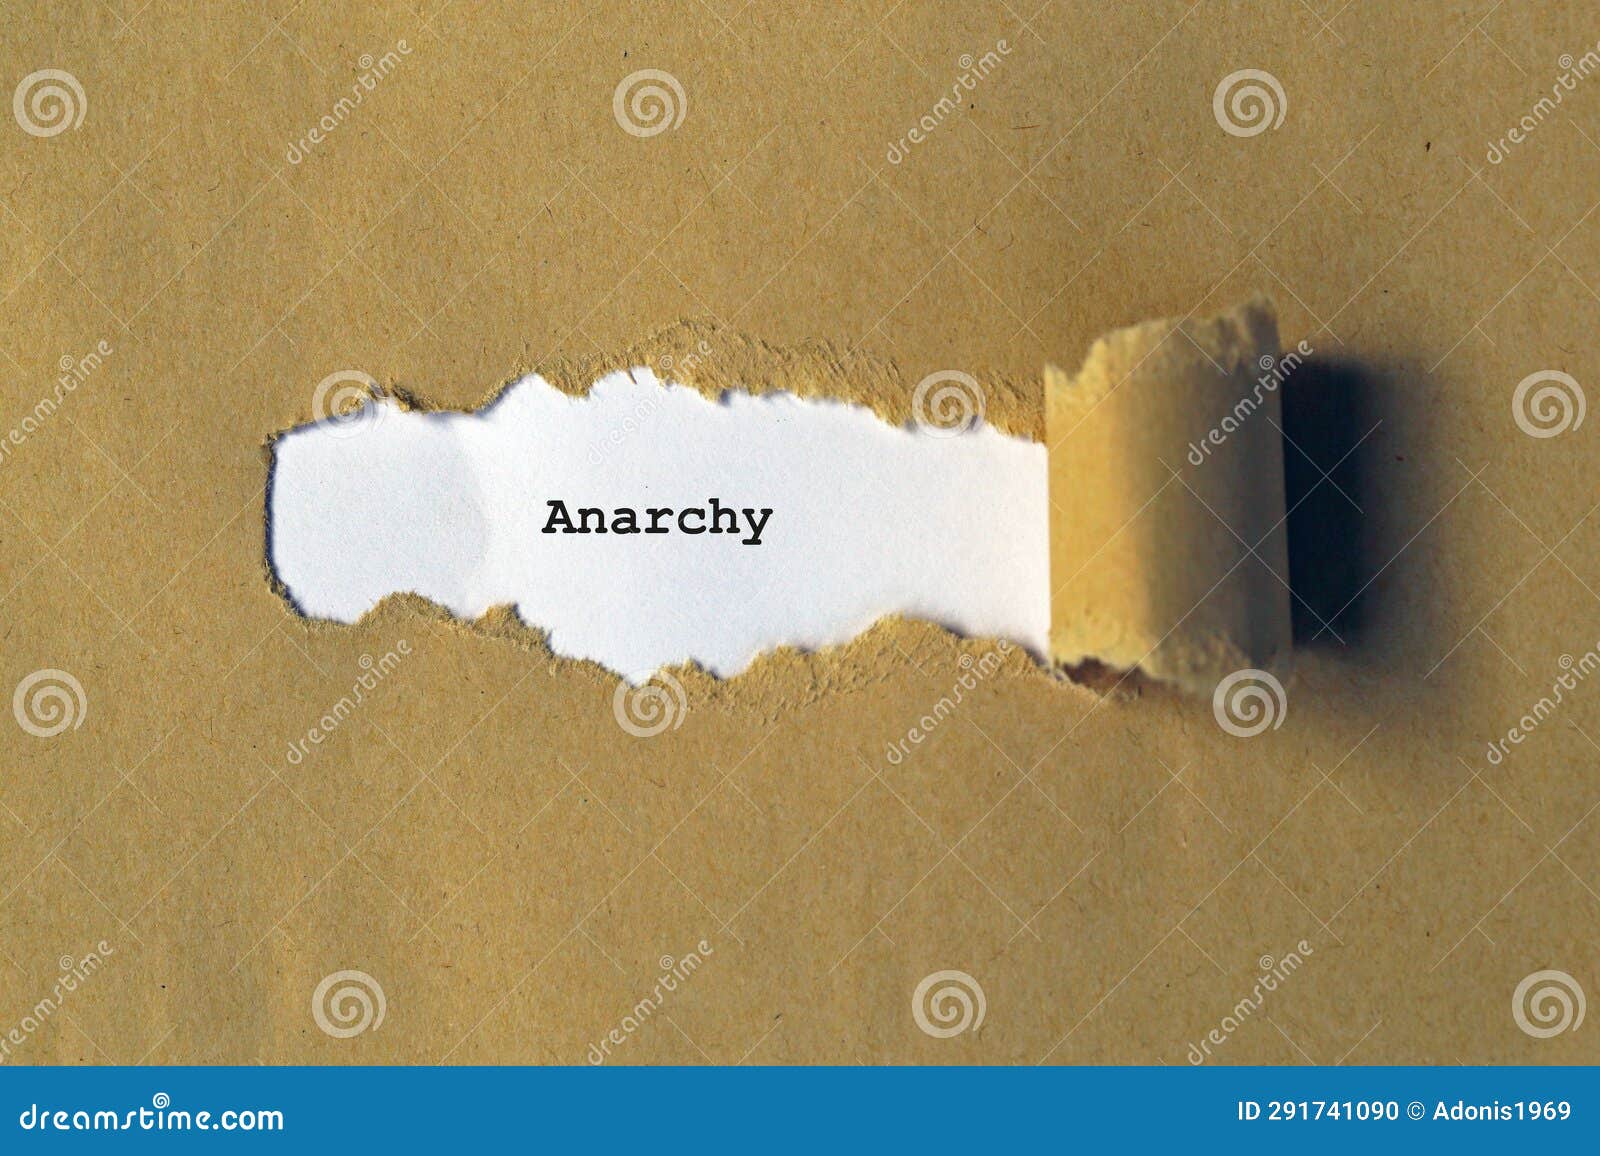 anarchy on white paper